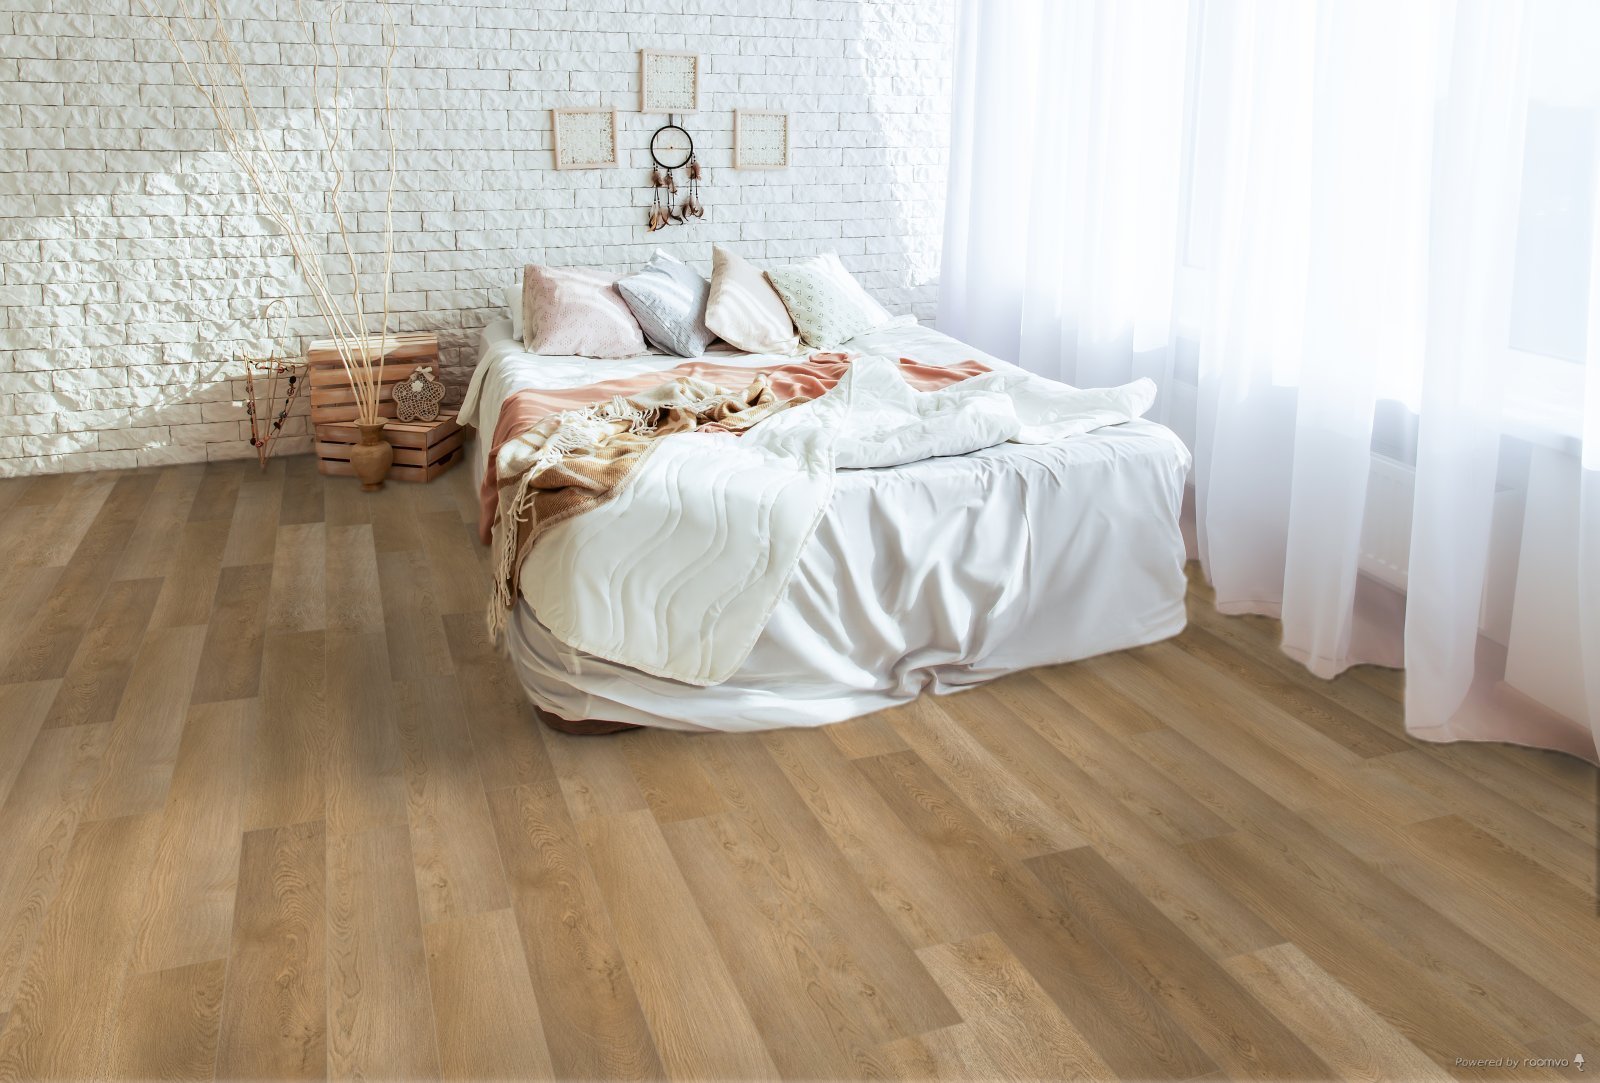 Horizen Flooring presents to you a picture of a quality wide plank Camden luxury vinyl plank. NovoCore Q Merengue collection features a wide range of colors & designs that will compliment any interior. Natural wood grain synchronized surface allow for an authentic hardwood look & feel. This collection features a 0.3″ / 7.5 mm overall thickness and a durable 22 mil / 0.55 mm wear layer for residential and commercial applications.